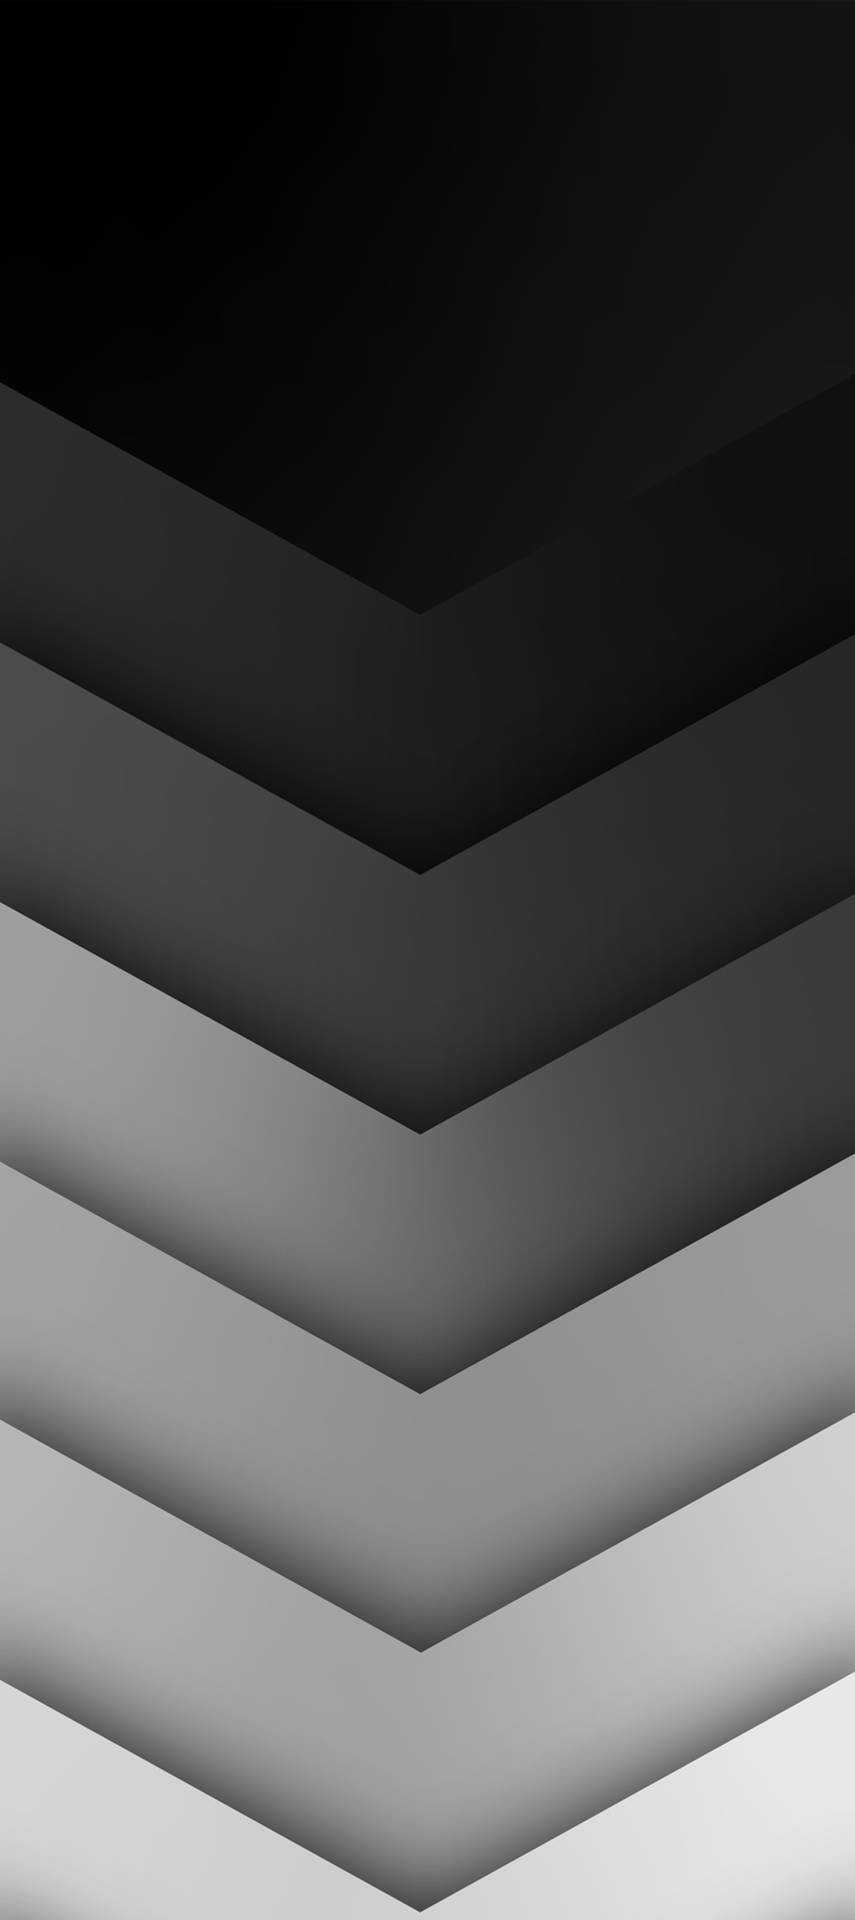 Chevron Pattern Black And Grey Iphone Background